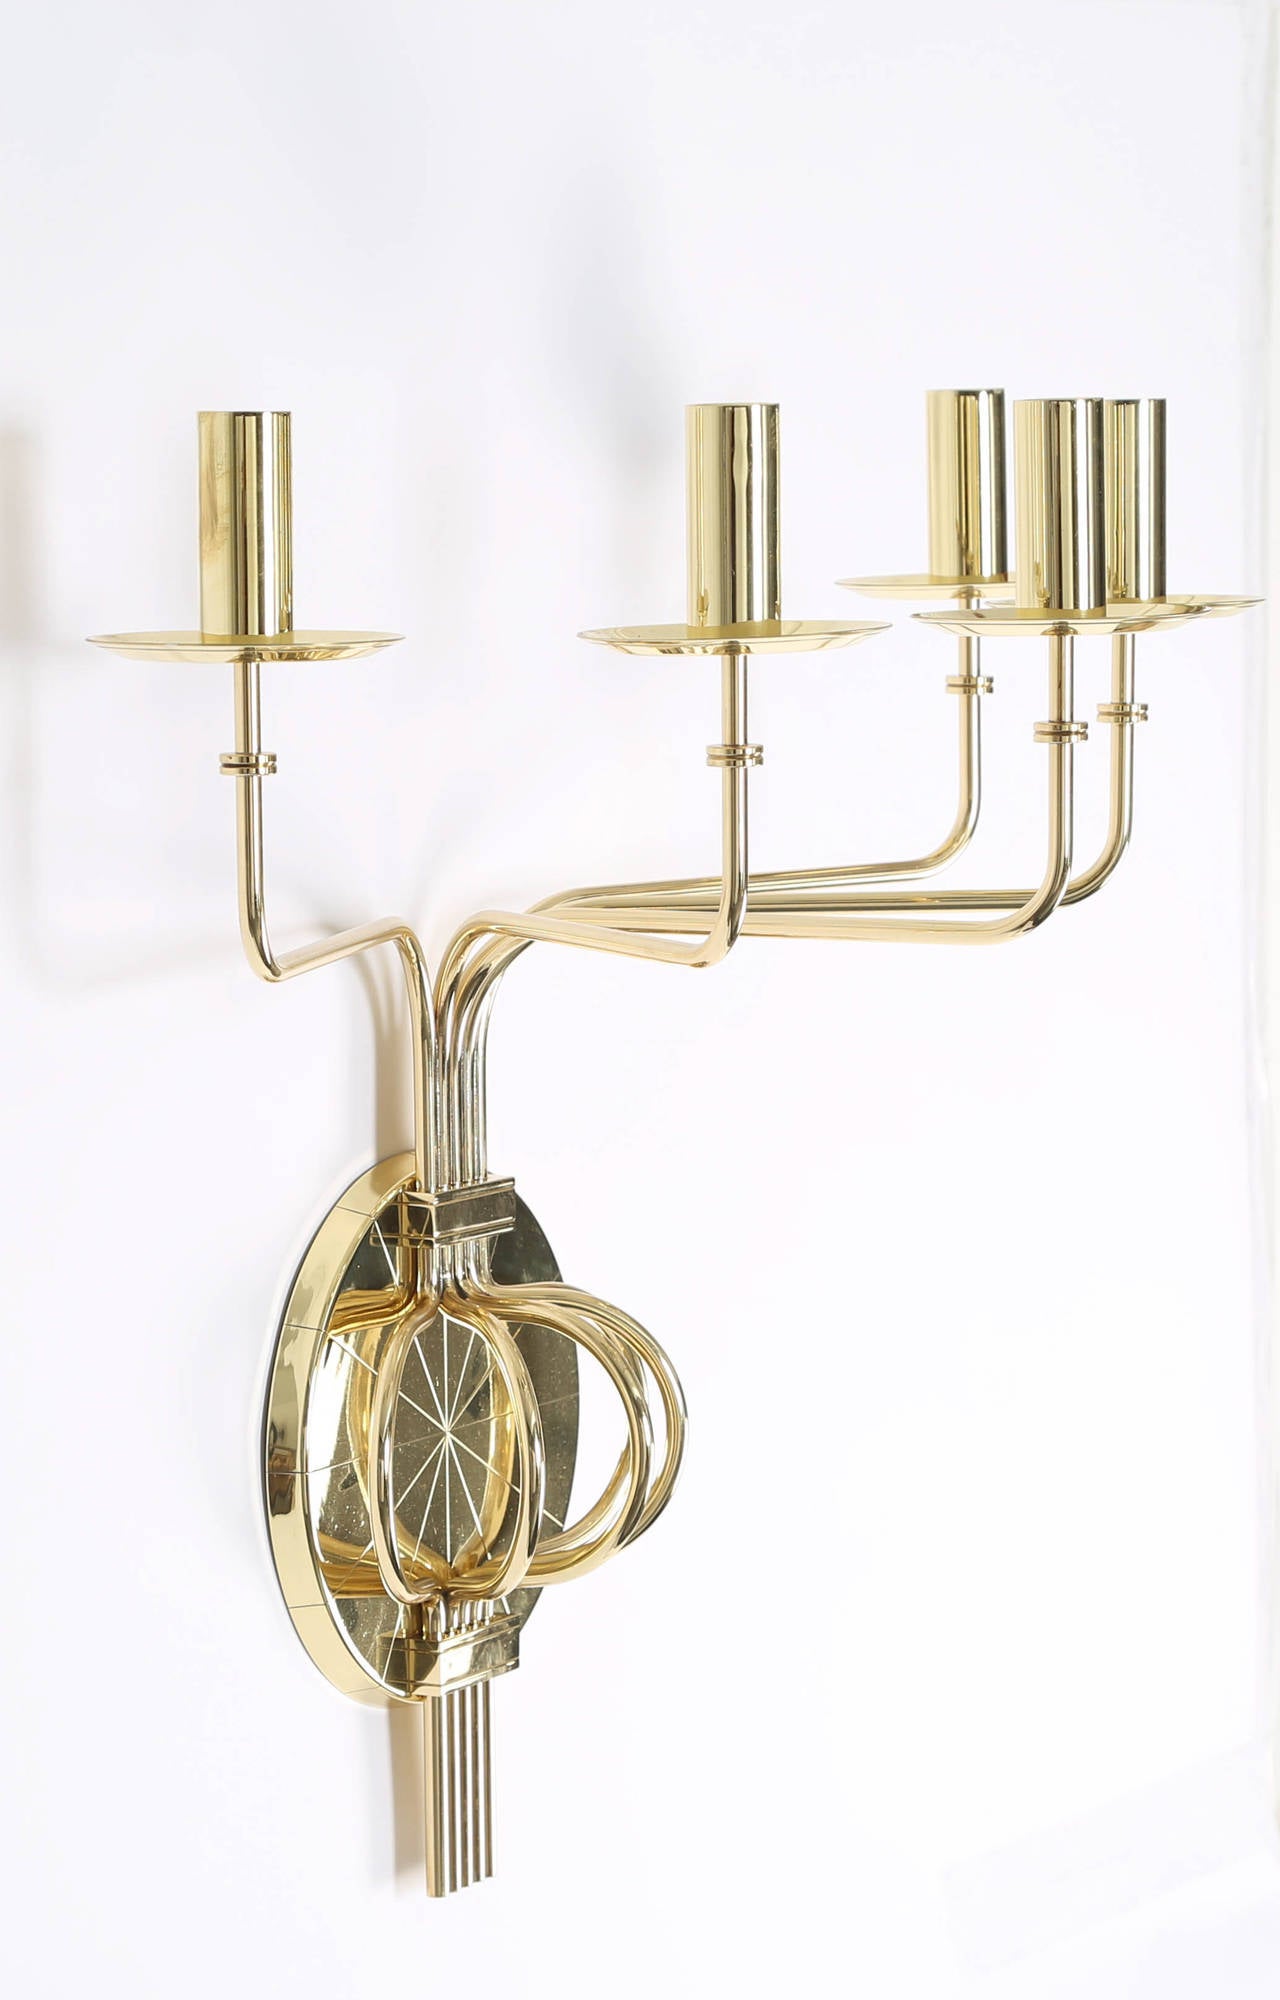 Pair of 1950s Tommi Parzinger Brass Wall Candelabras In Good Condition For Sale In Brooklyn, NY